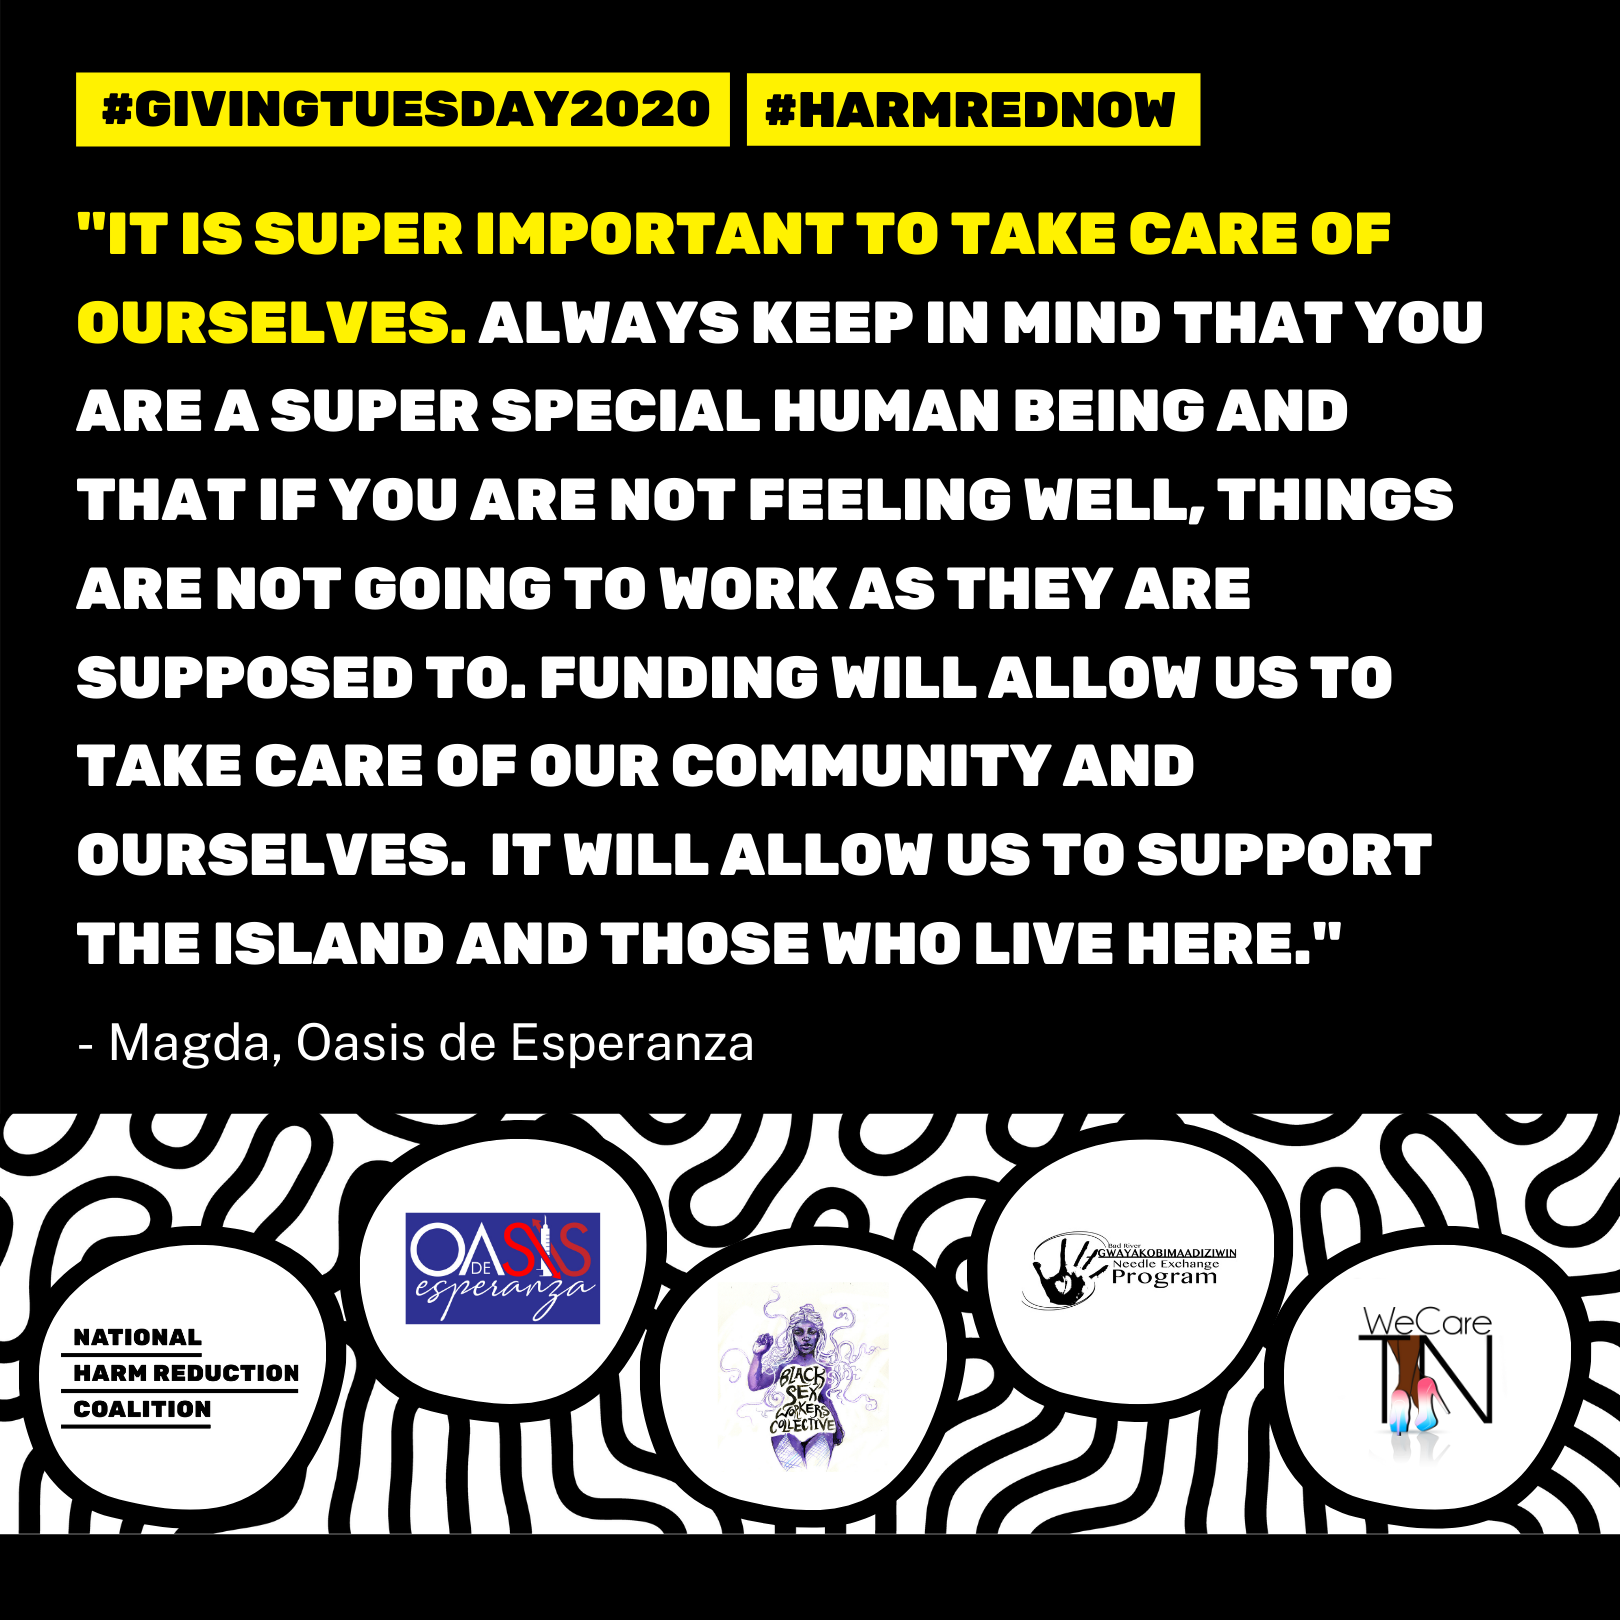 ''''It is super important to take care of ourselves. Always keep in mind that you are a super special human being and that if you are not feeling well, things are not going to work as they are supposed to. Funding will allow us to take care of our community and ourselves. It will allow us to support the island and those who live here.'''' - Magda, Oasis de Esperanza 